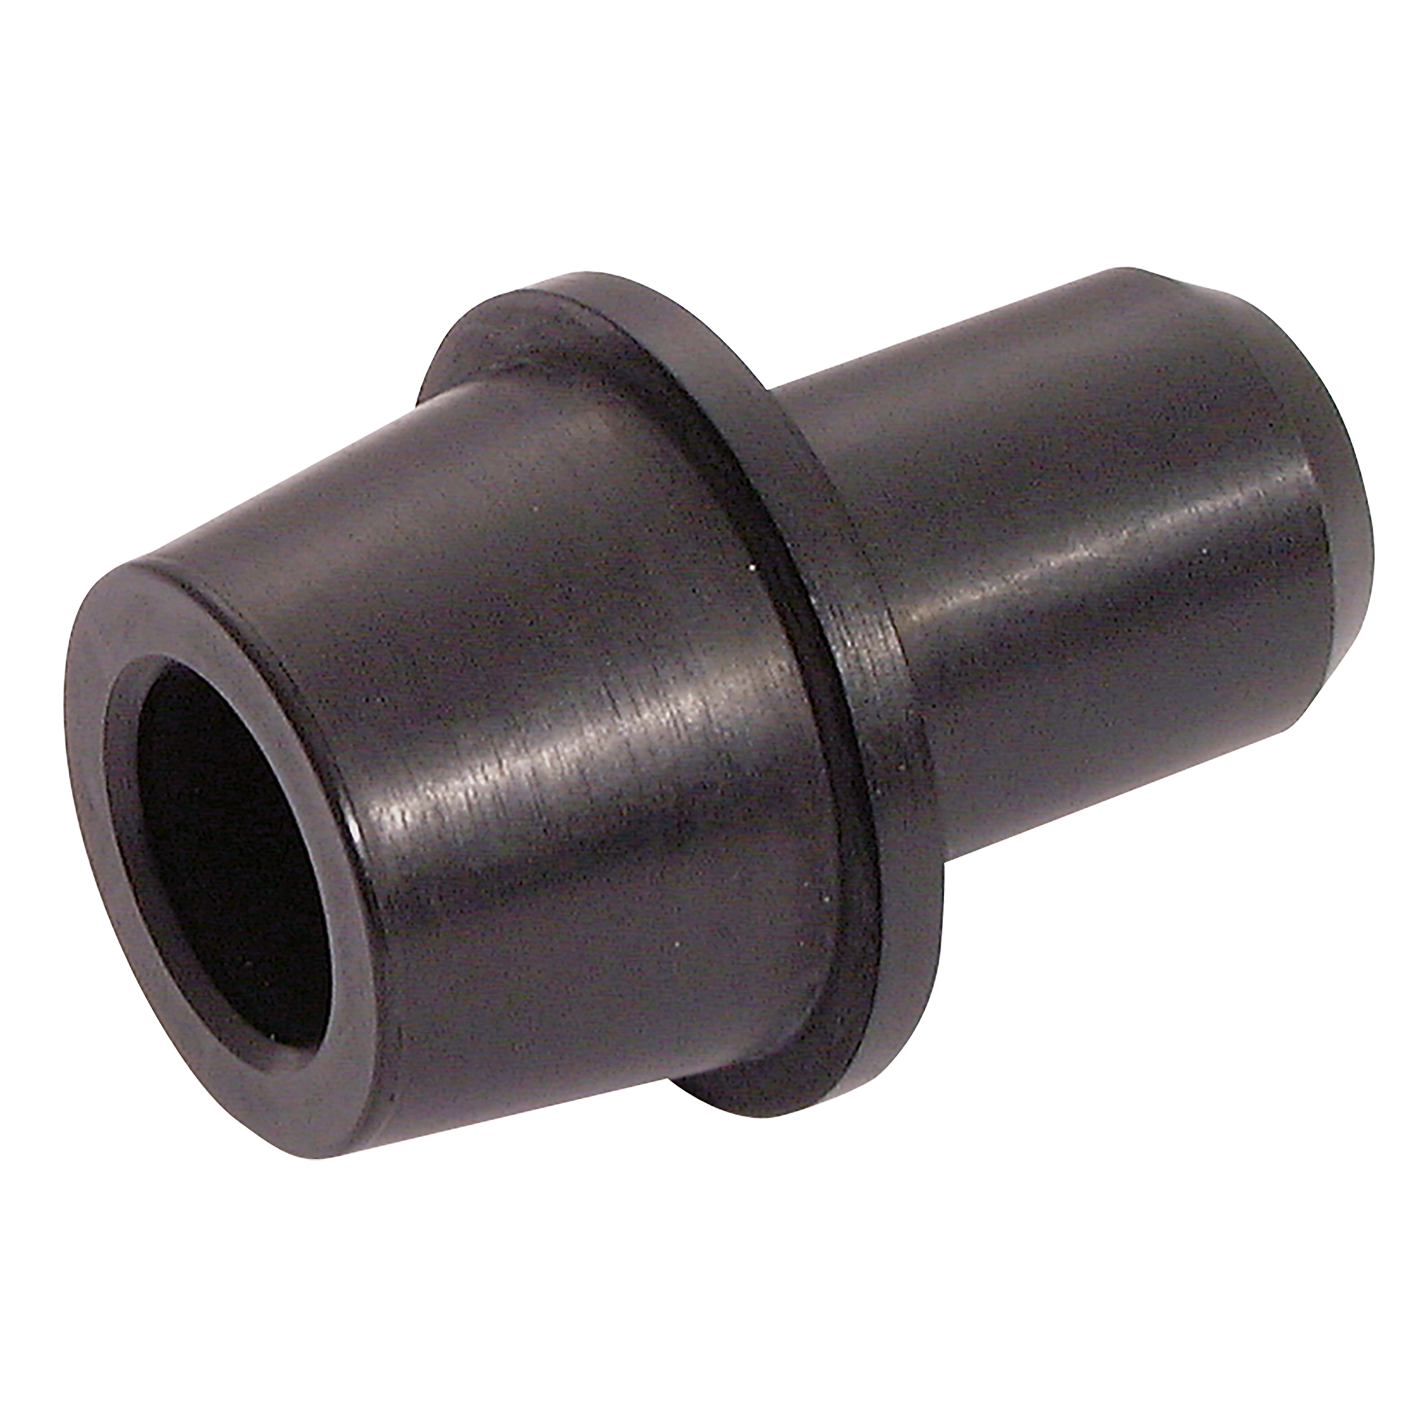 UNIVERSAL FITTING FOR COPPER TUBE